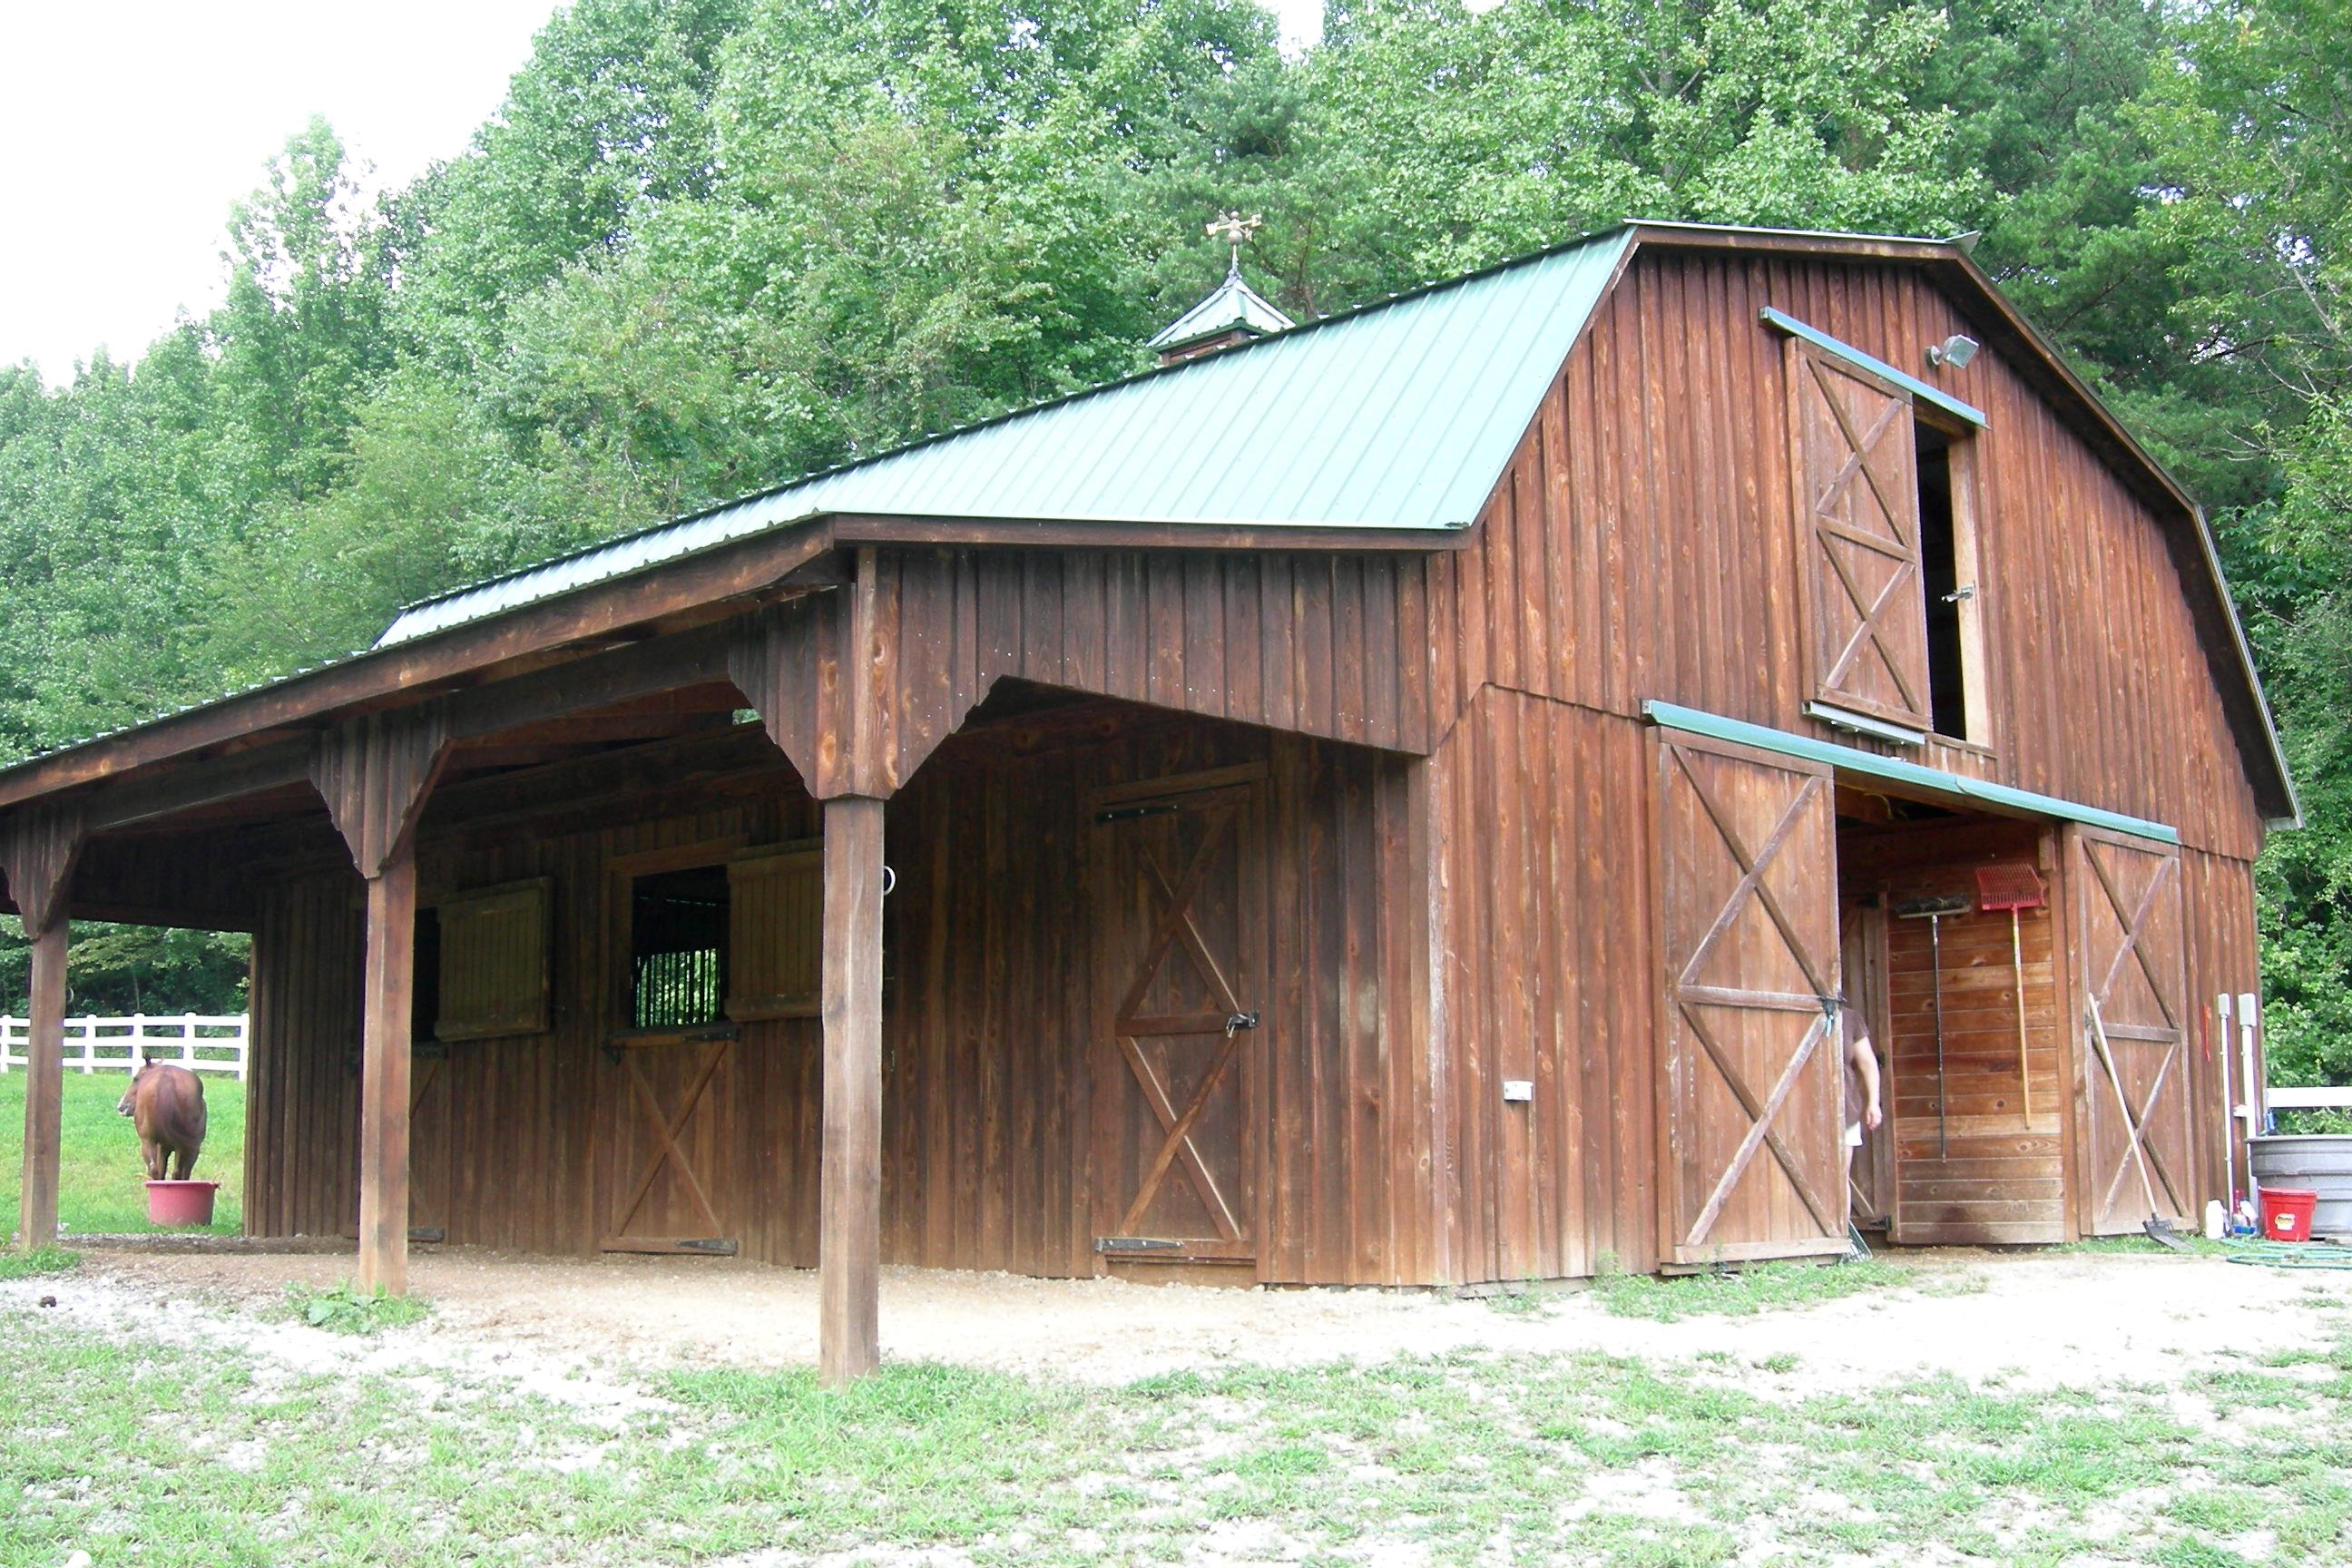 Custom Built Equestrian Structures including Horse Stables, Arenas, Pole Barns and More in Southern Maryland